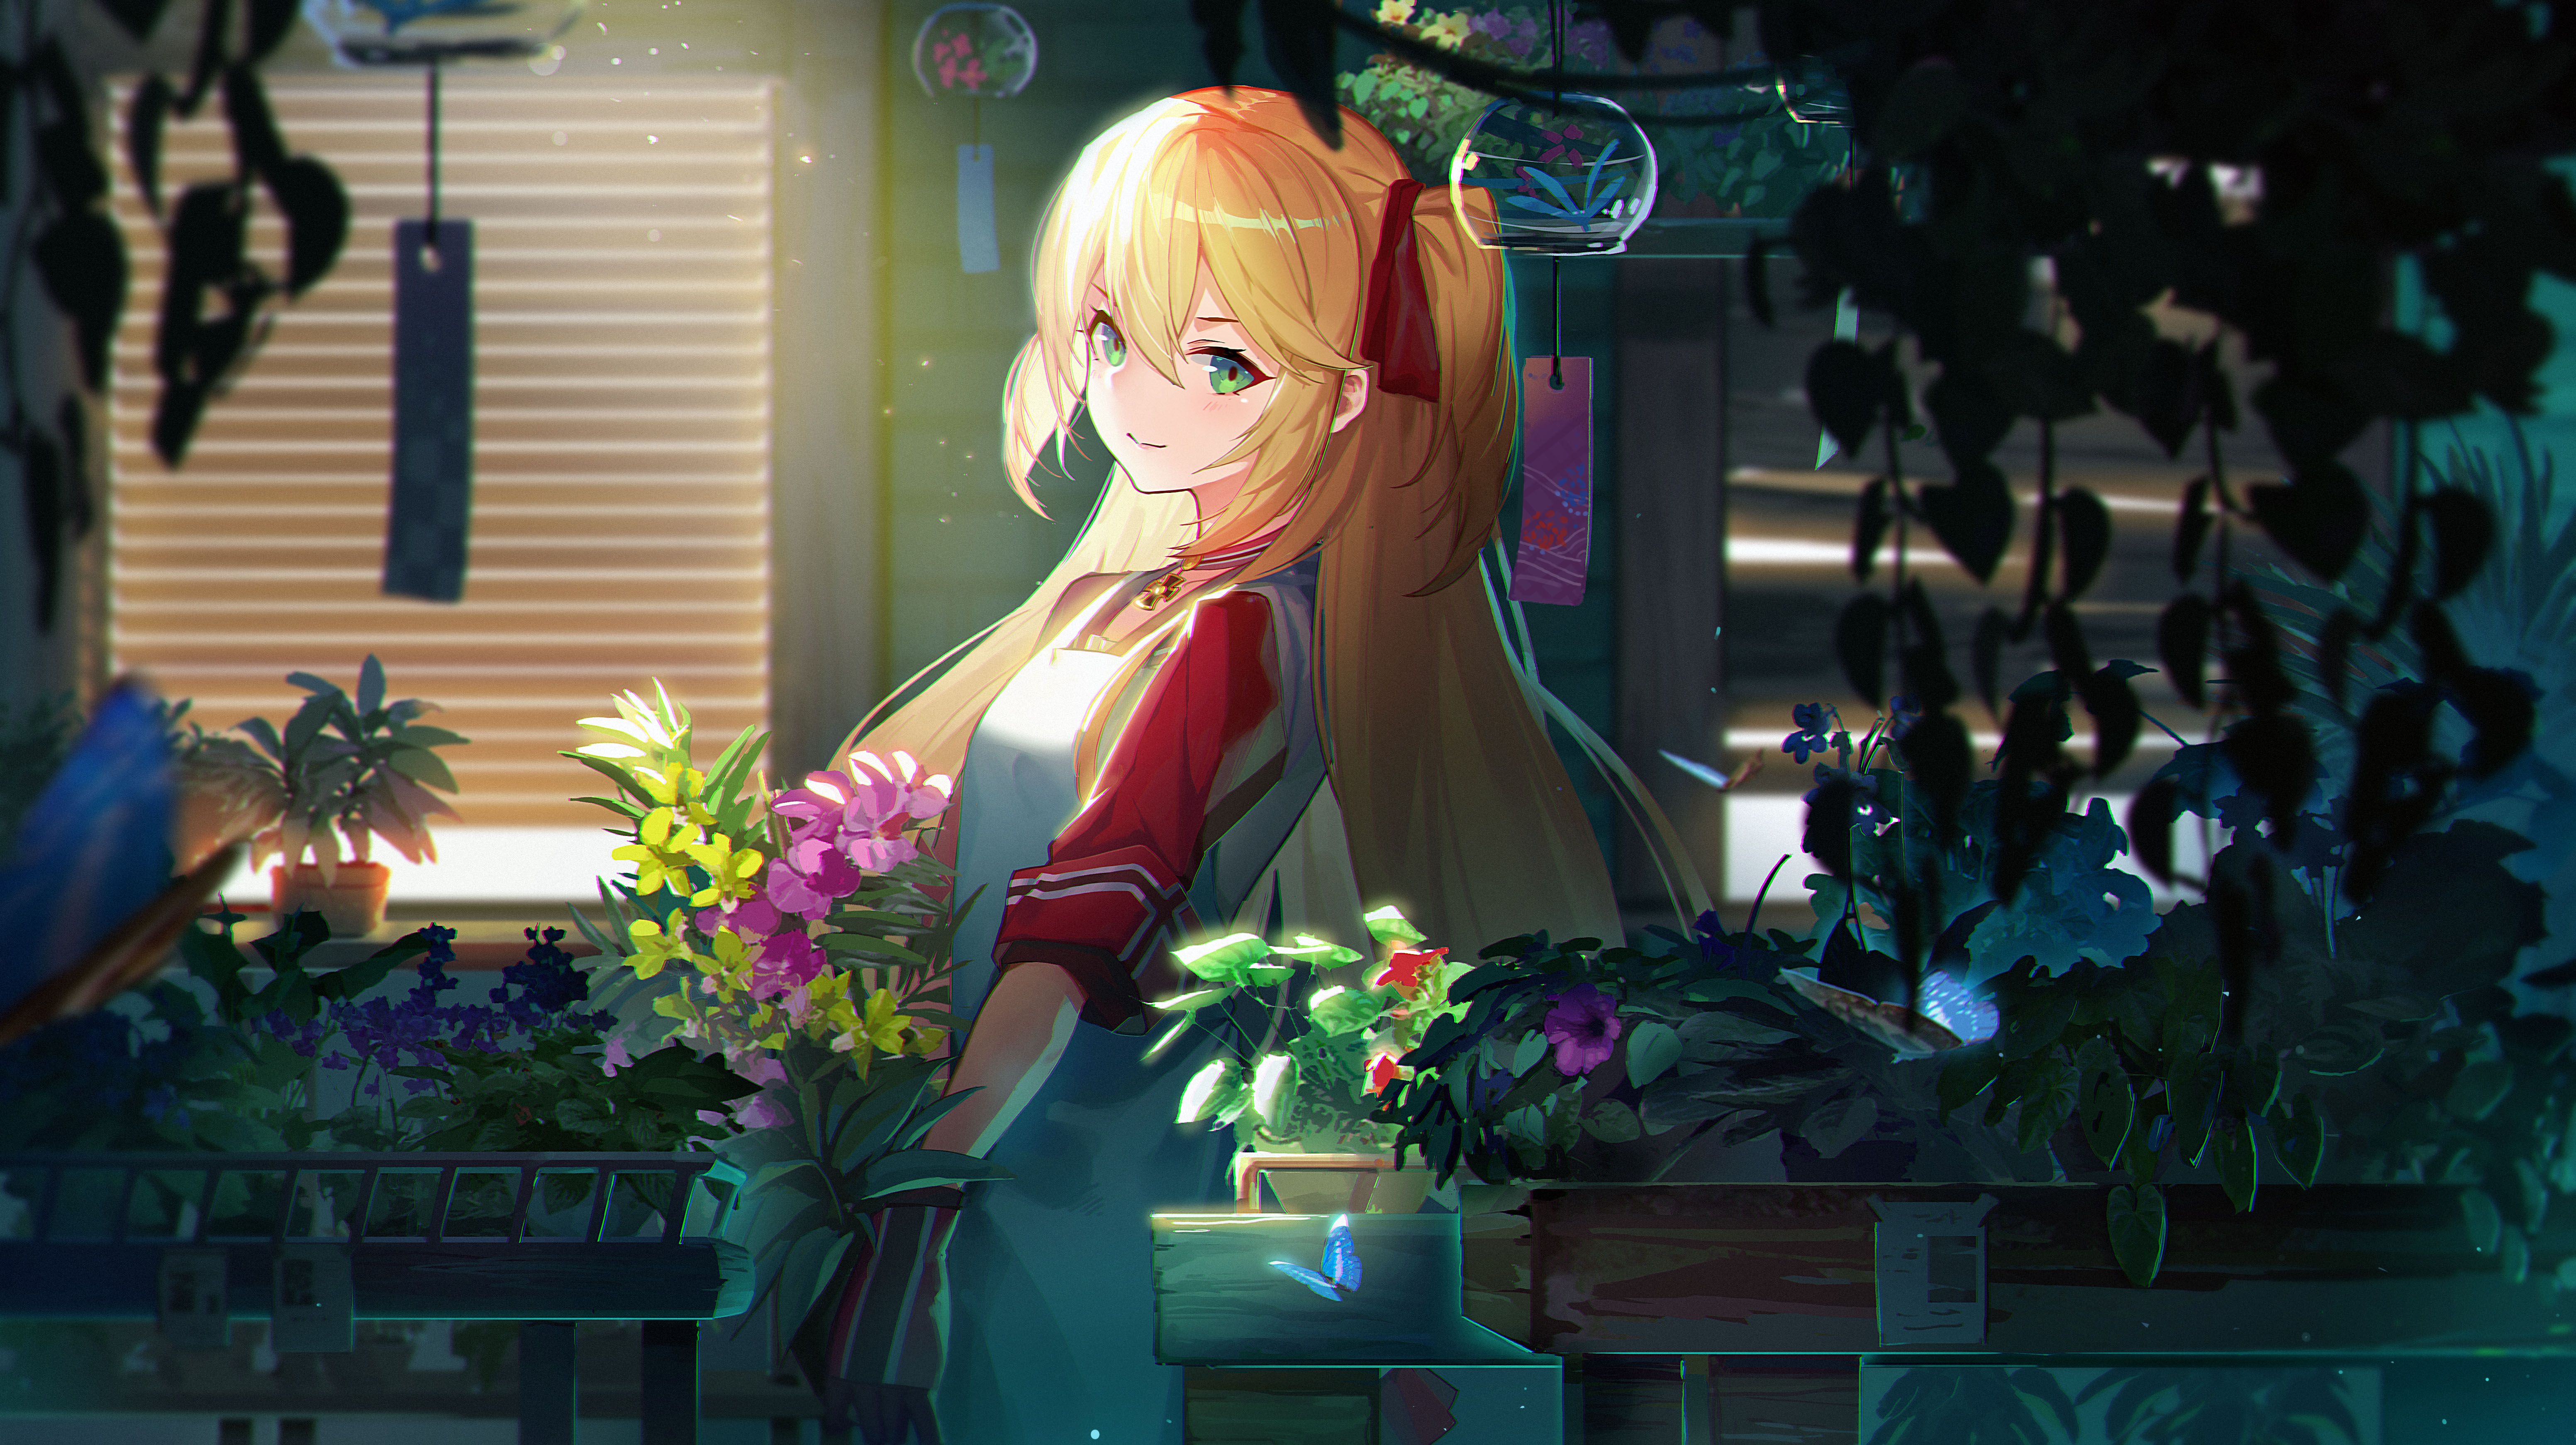 Anime Flowers Blonde Twintails Girl, HD Anime, 4k Wallpaper, Image, Background, Photo and Picture